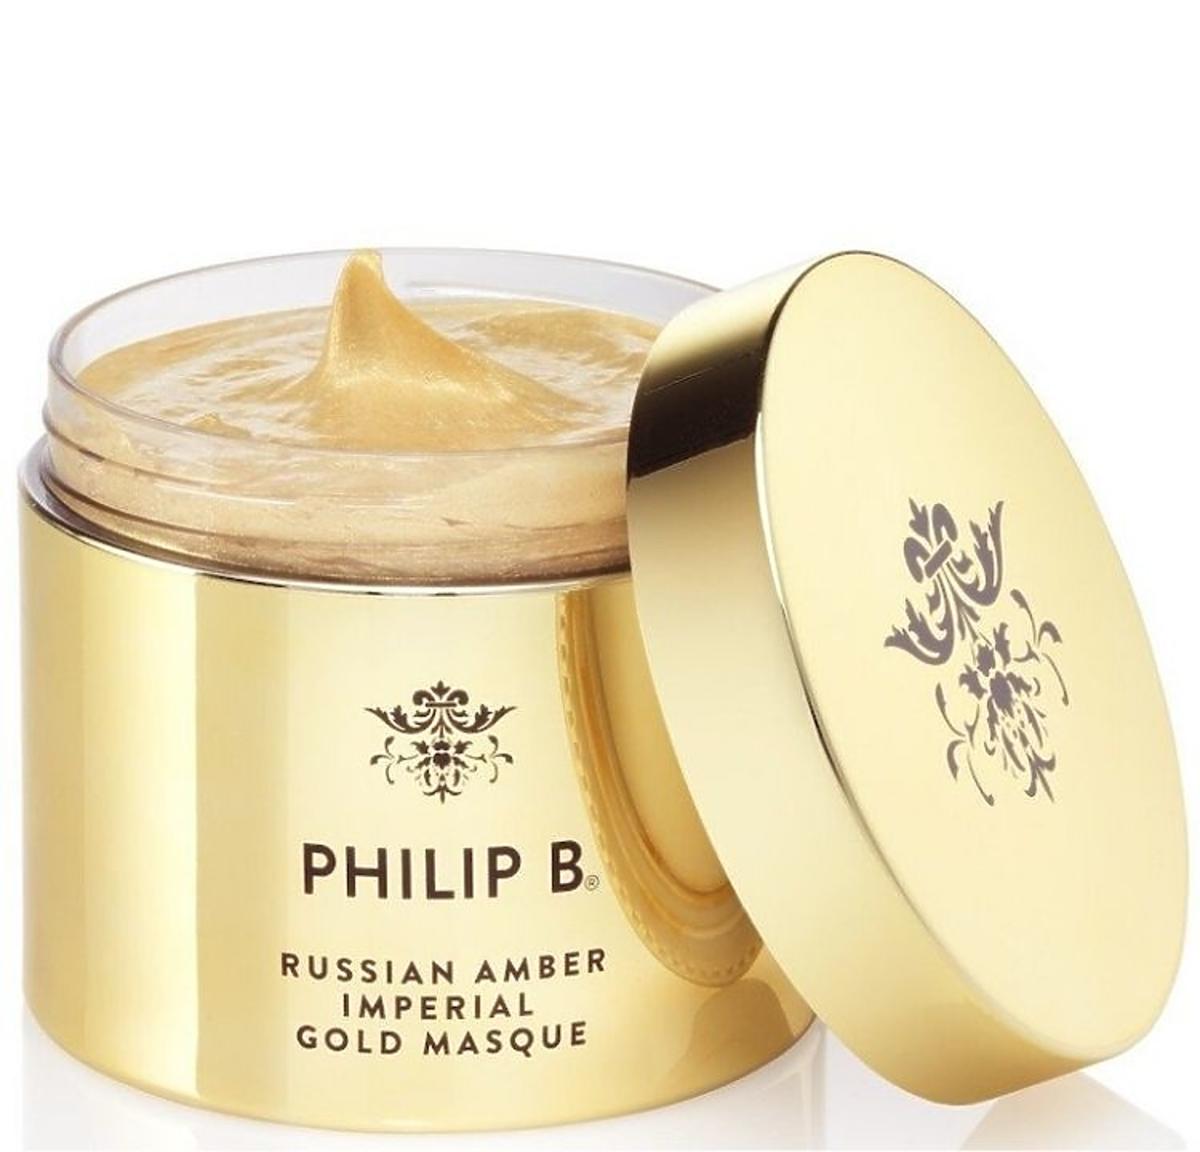 PHILIP B RUSSIAN AMBER IMPERIAL GOLD MASQUE 